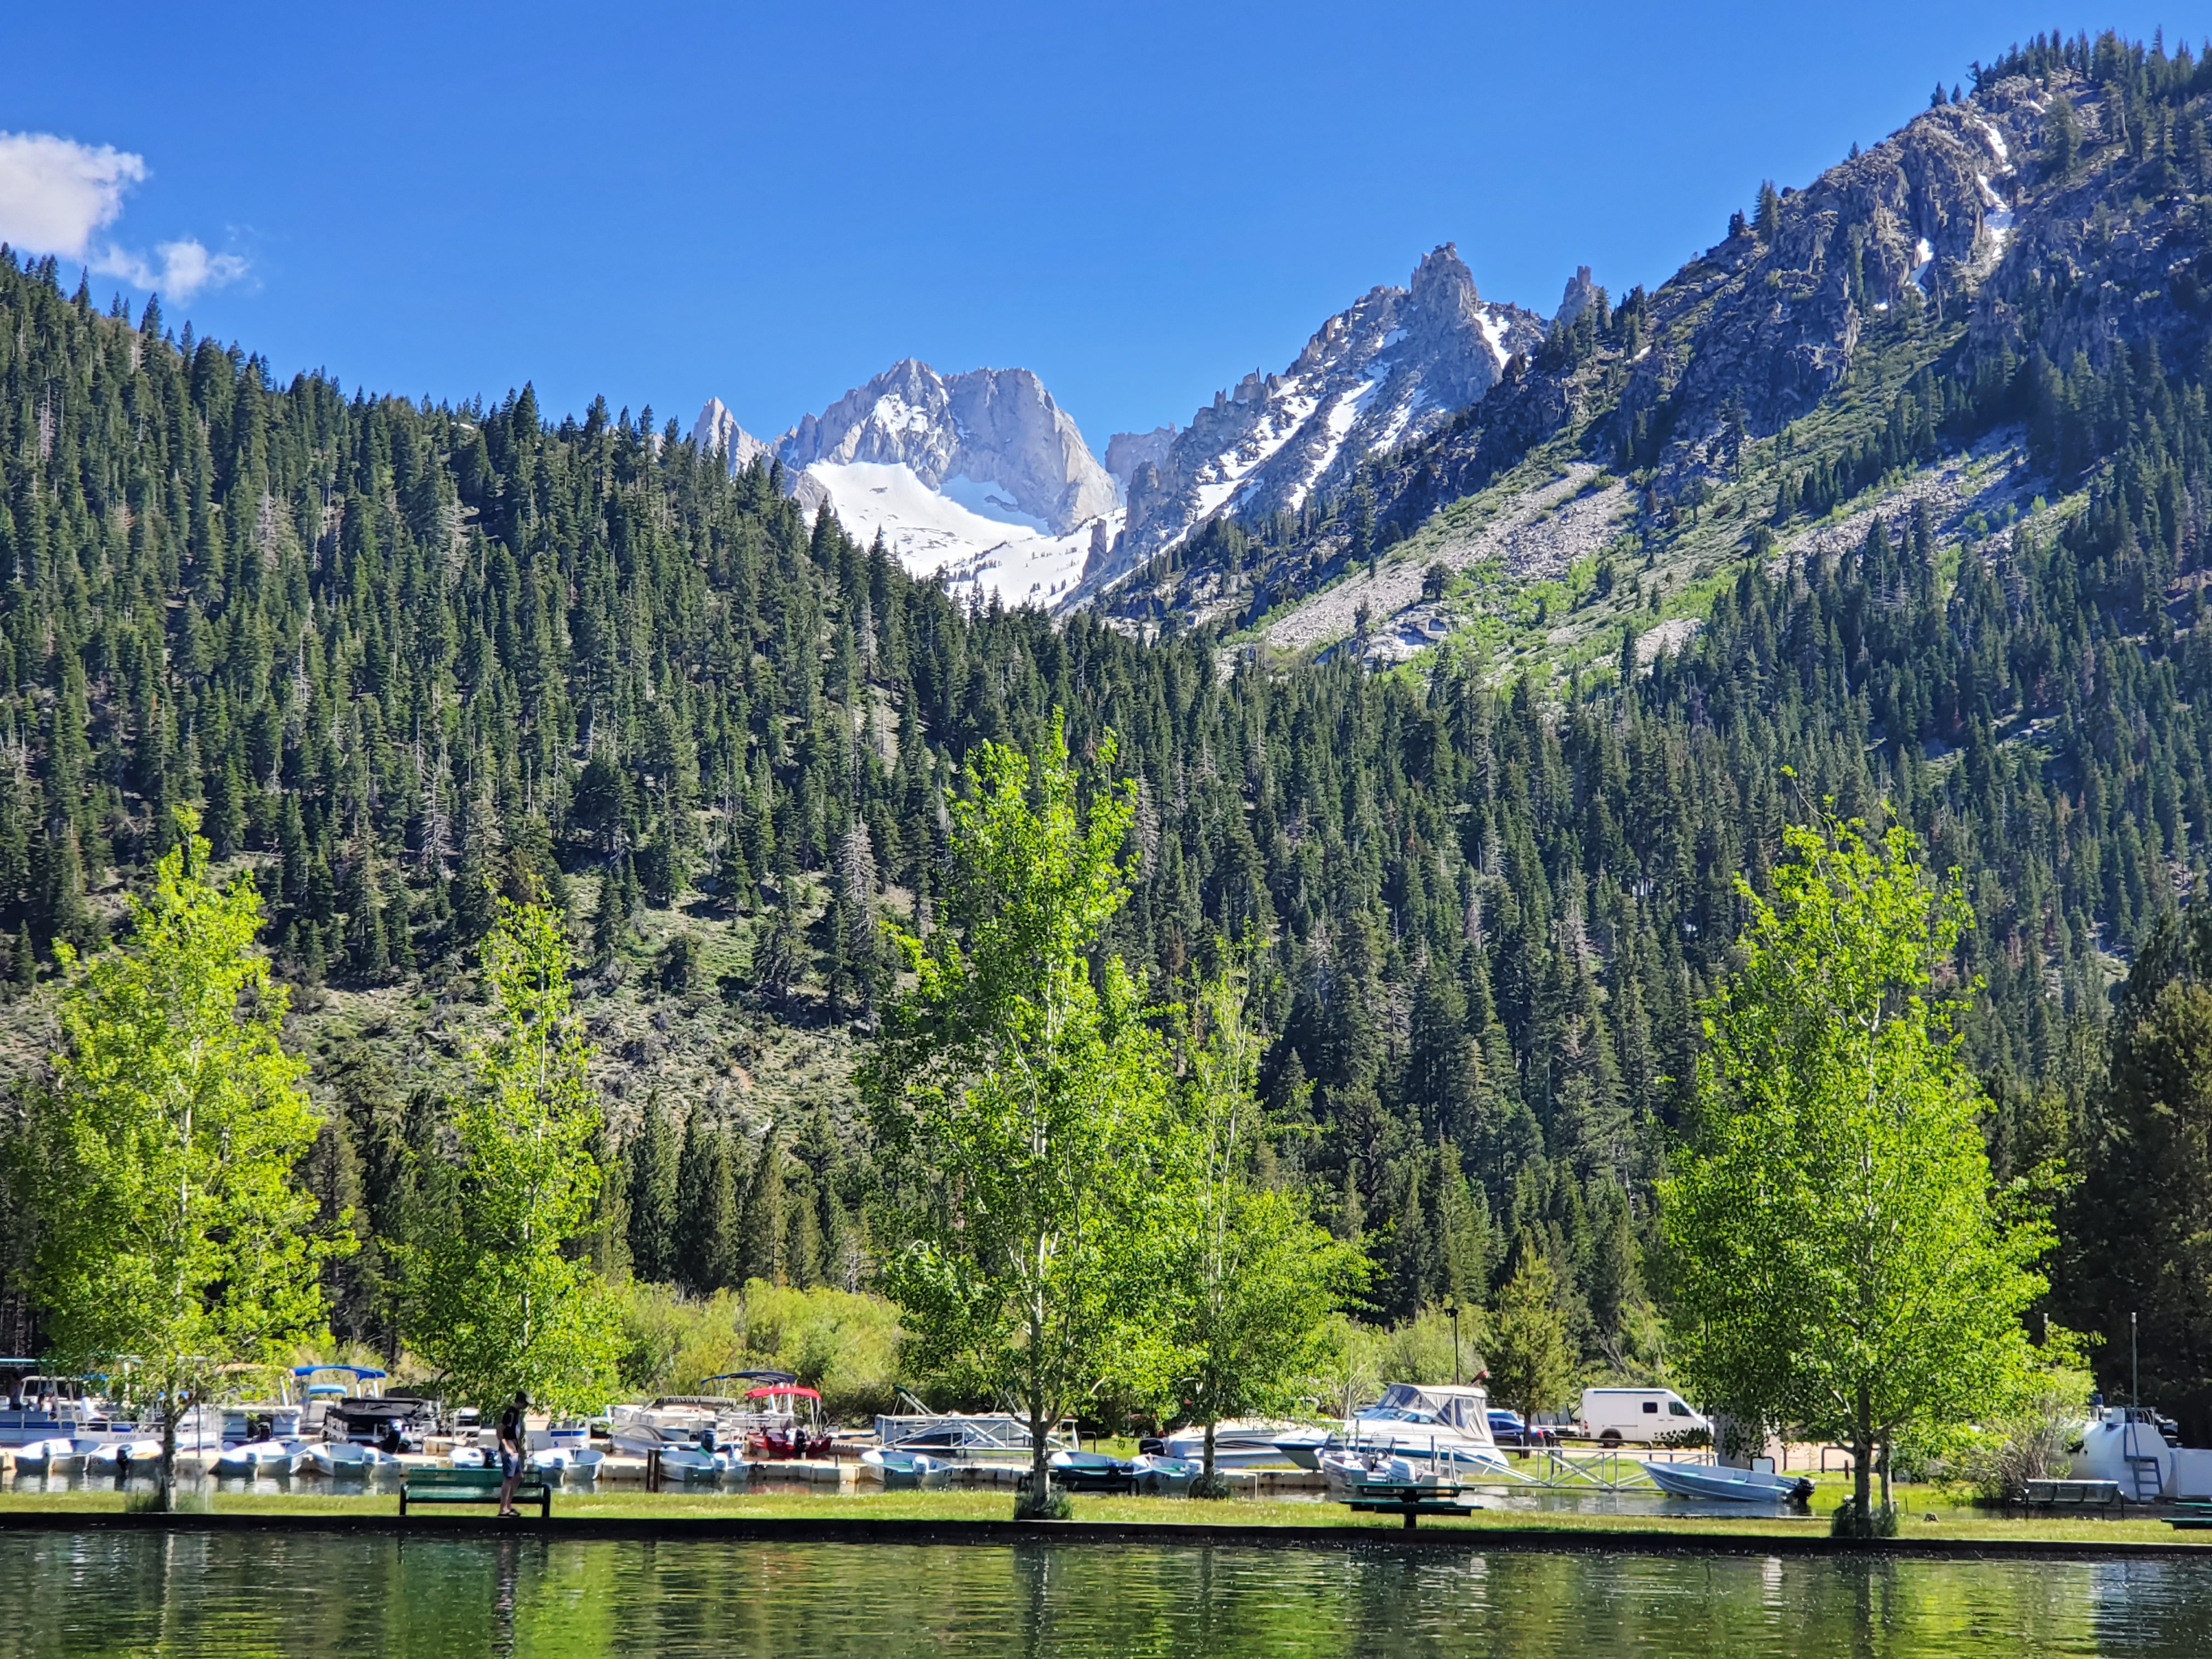 Upper Twin Lakes